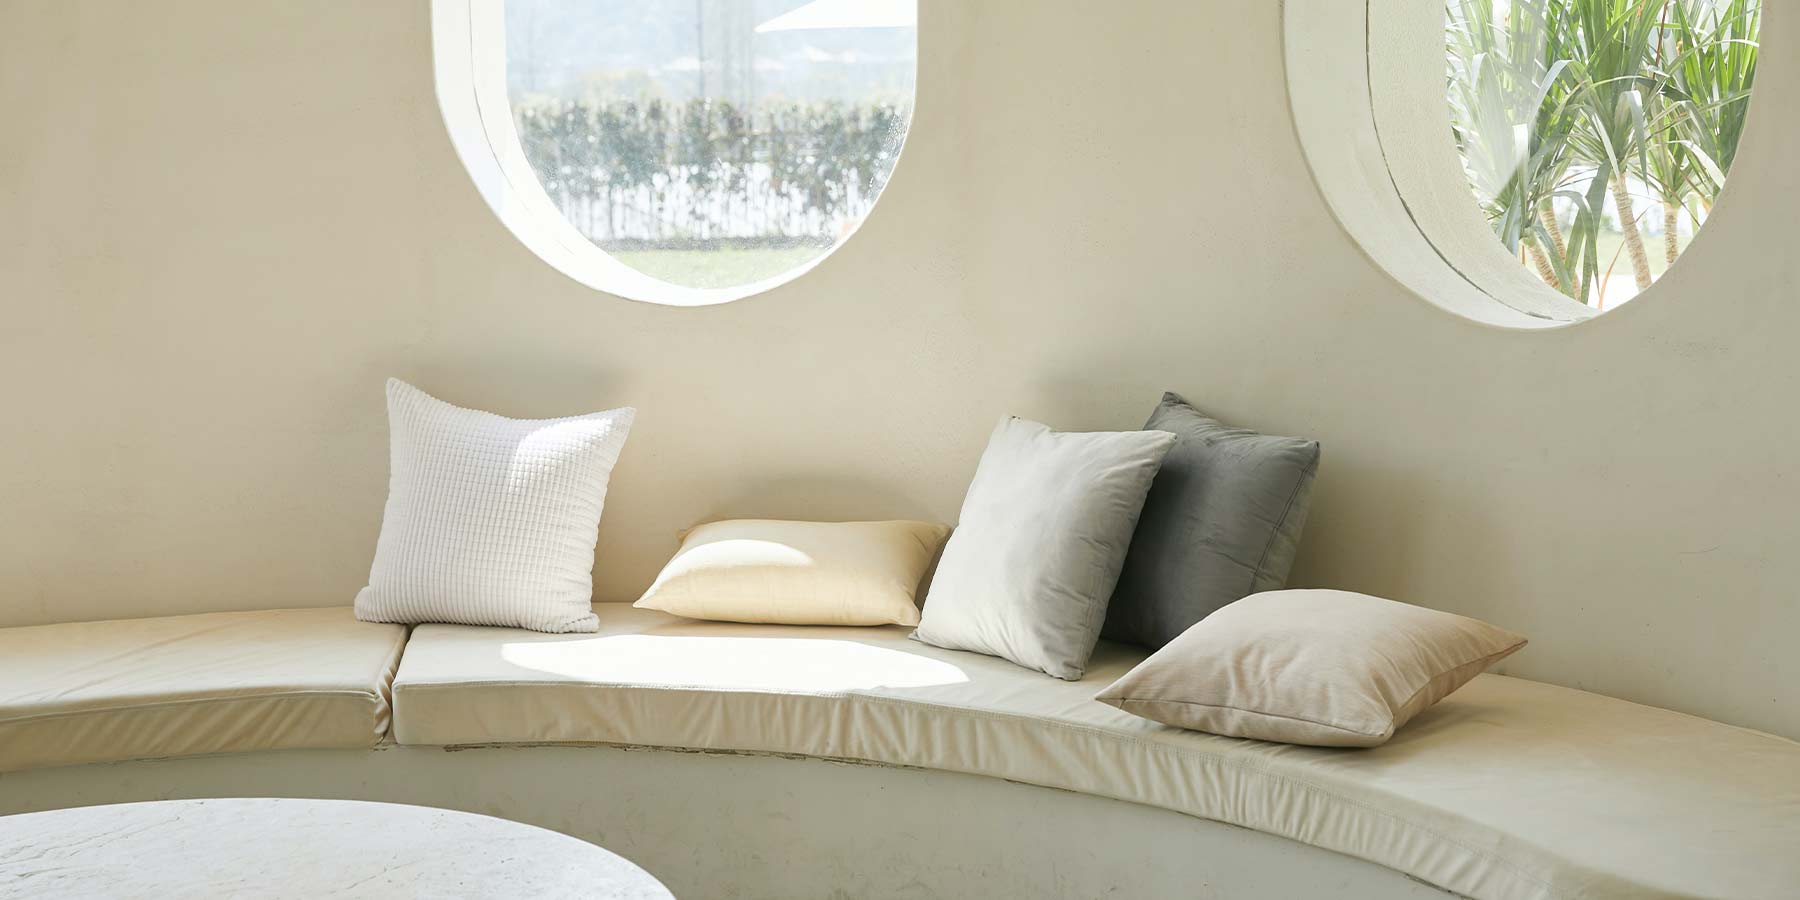 Beach House interior. Shoot of a circular corner white bench. There ae six light colors pillows over the couch and two circular windows above them.